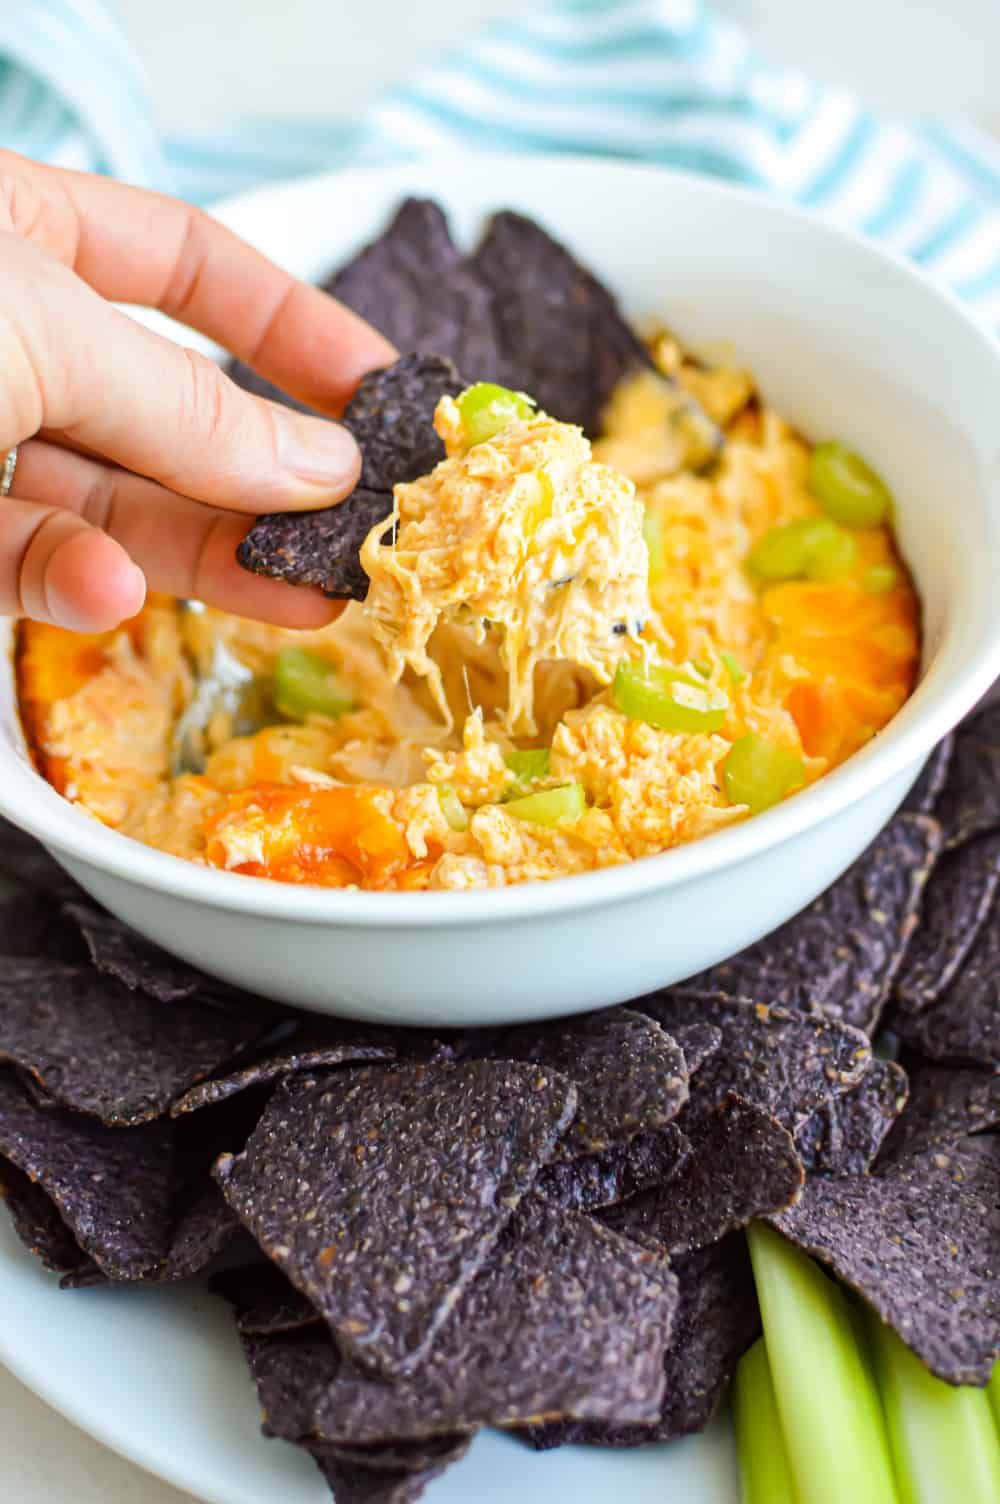 Close up of a hand scooping Creamy Buffalo Chicken Dip with blue corn chips.